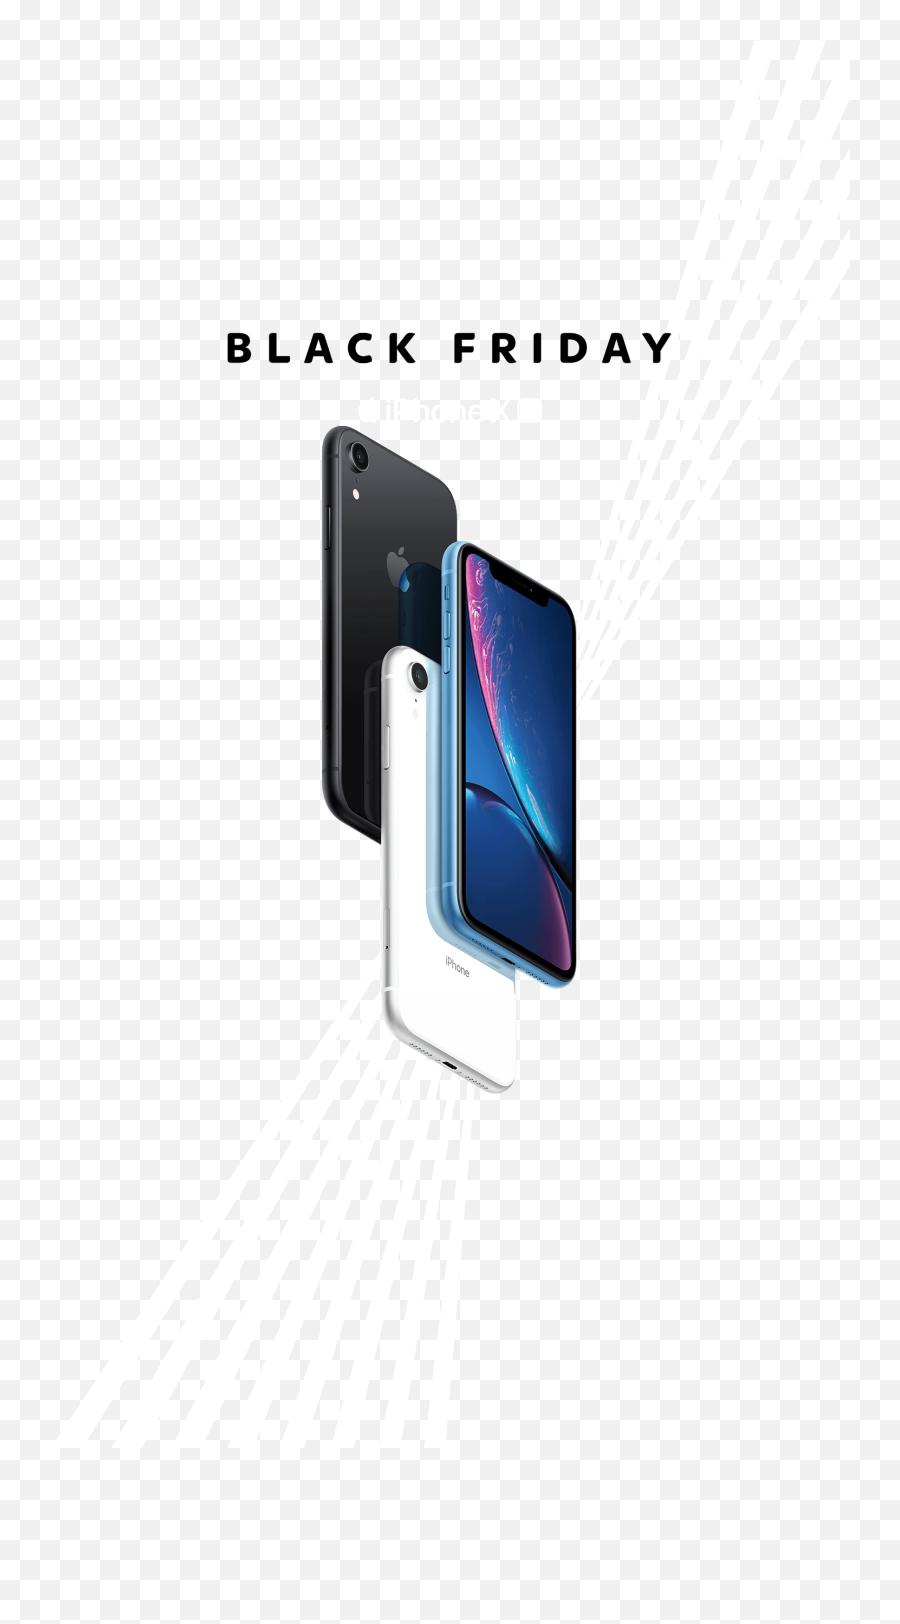 Download Iphone Xr Hd Png - Uokplrs Iphone Xr,Iphone.png Images